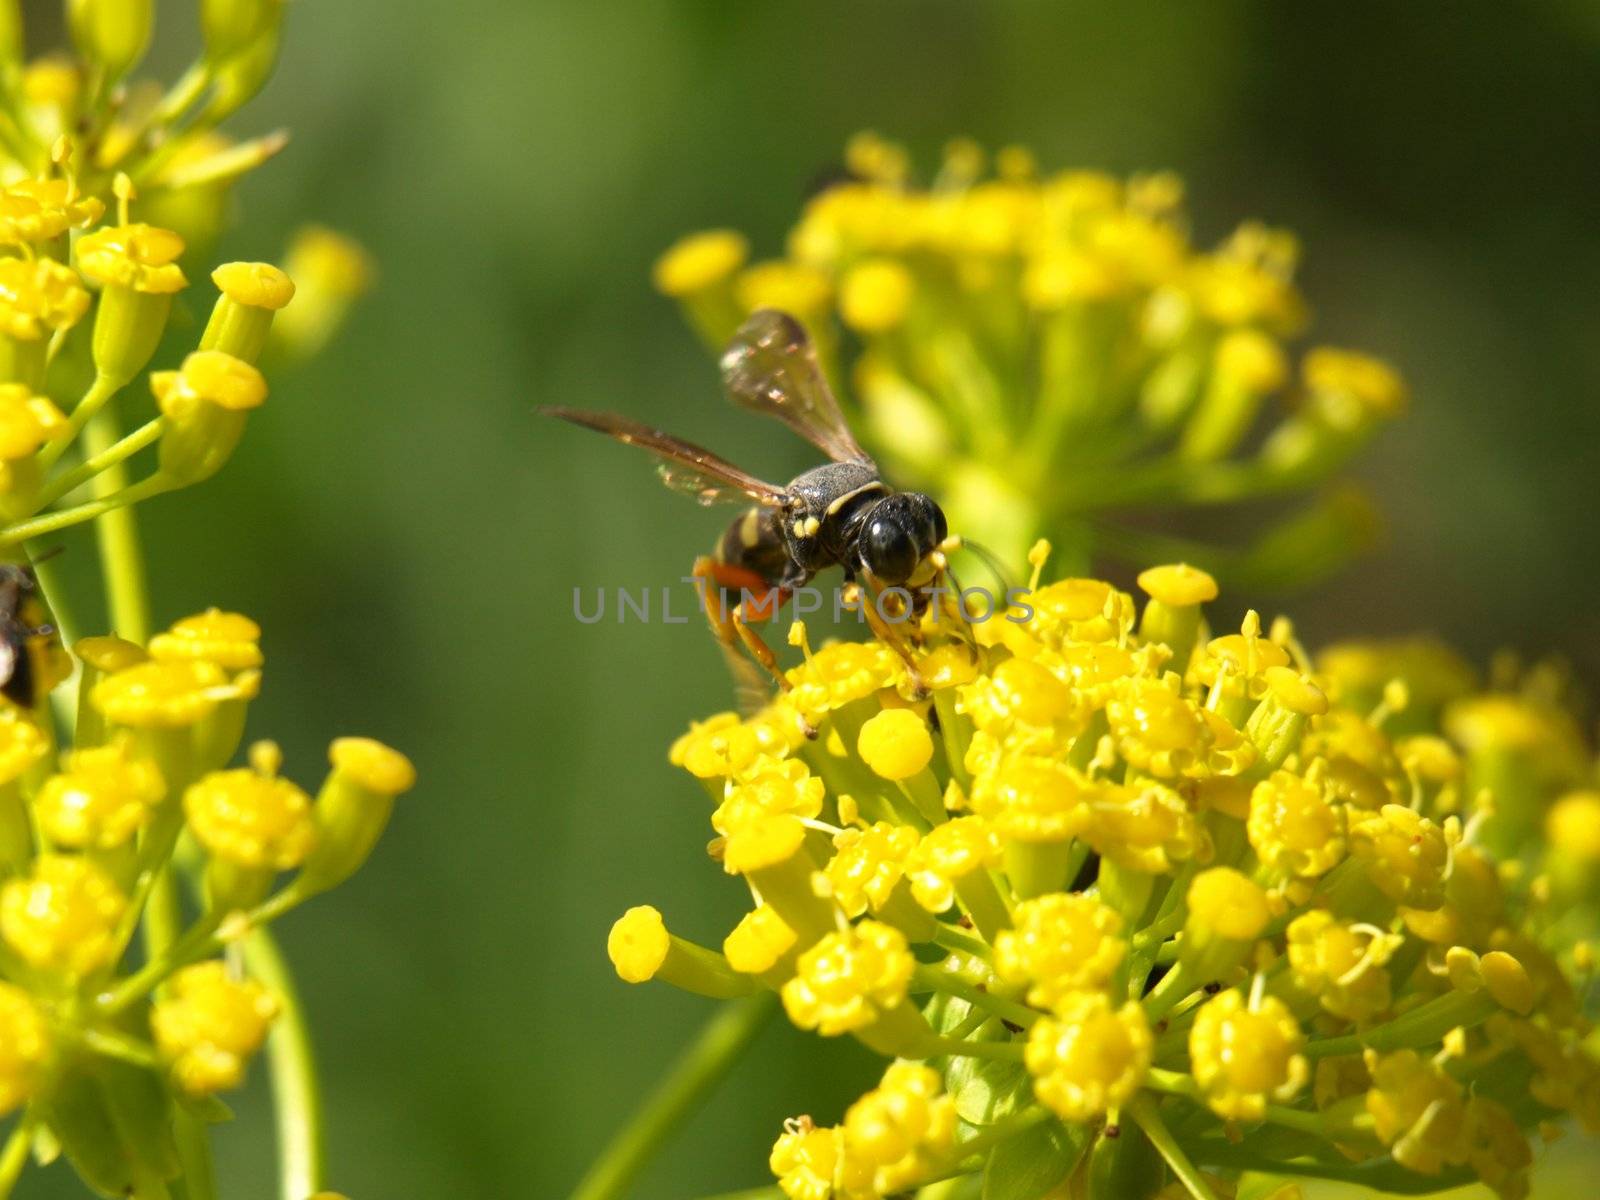 a close-up image of a bee on a fennel